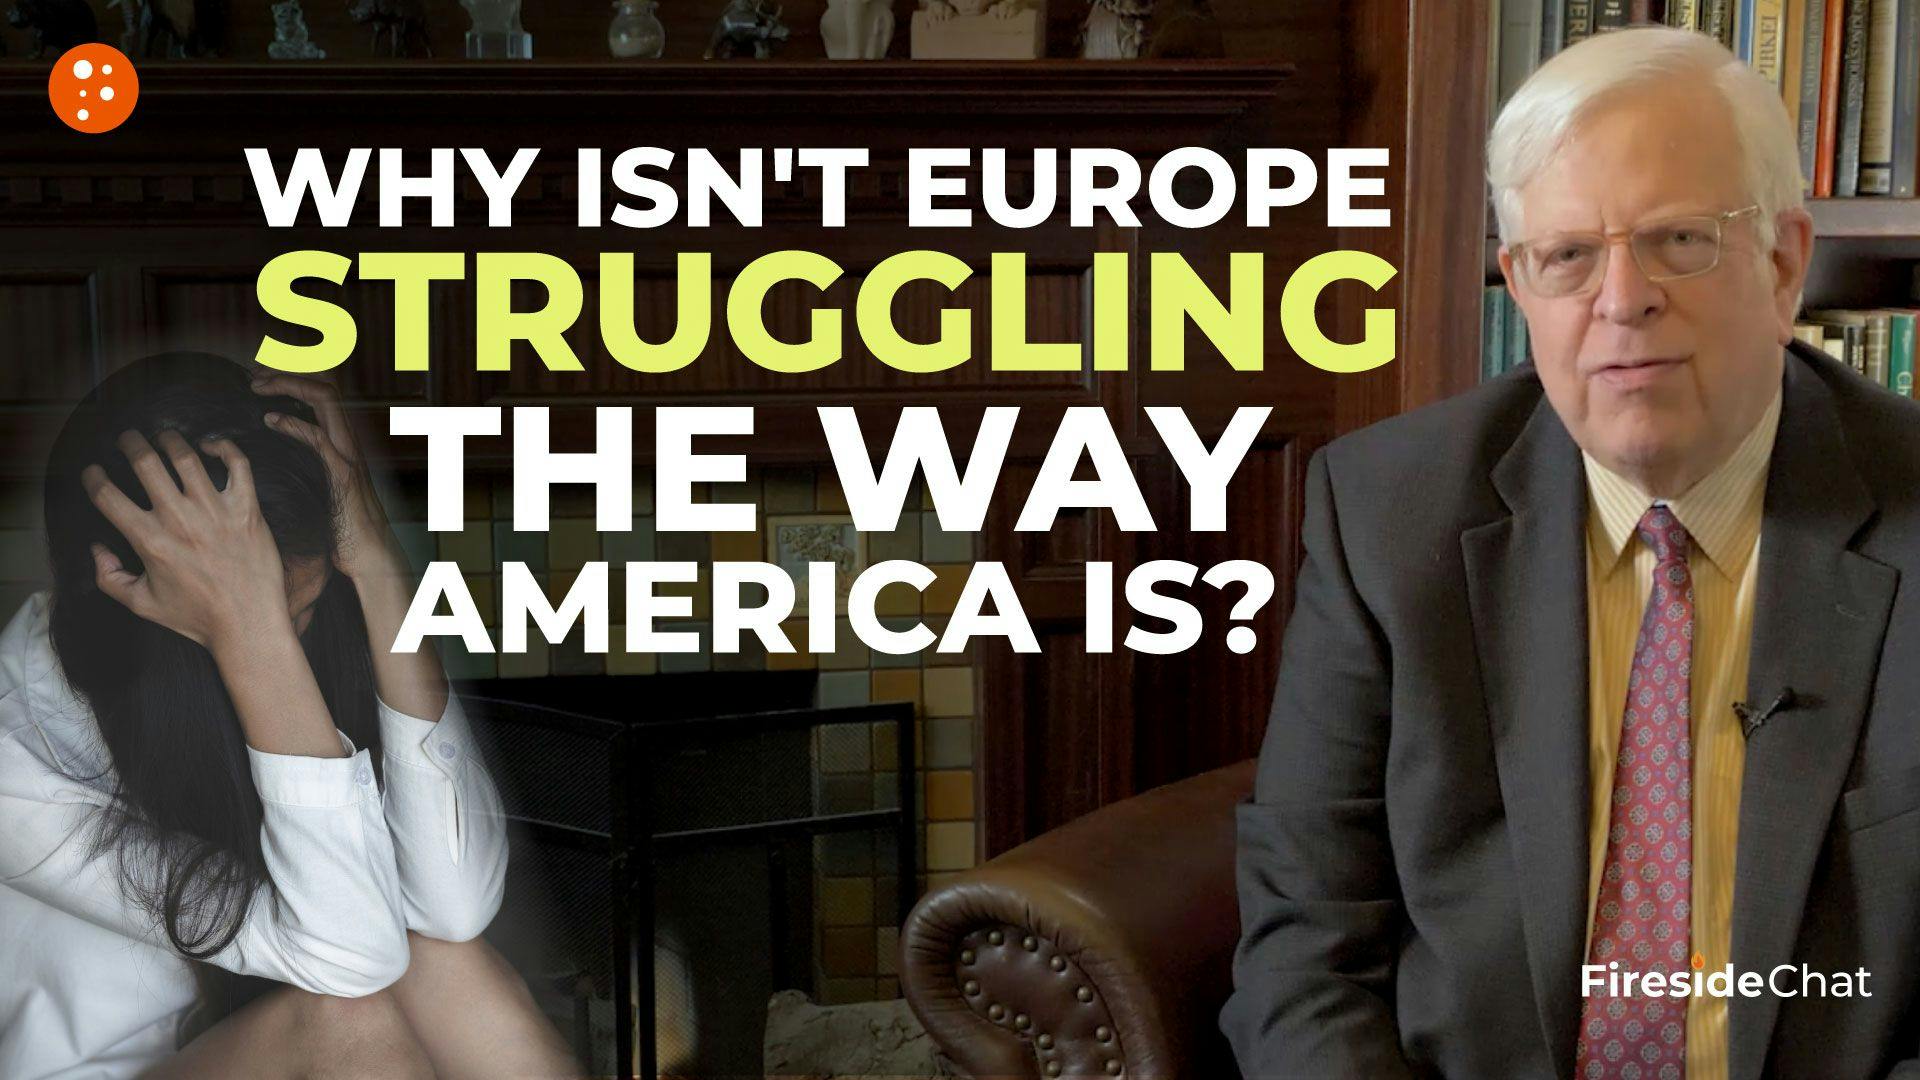 Why Isn’t Europe Struggling the Way America Is?